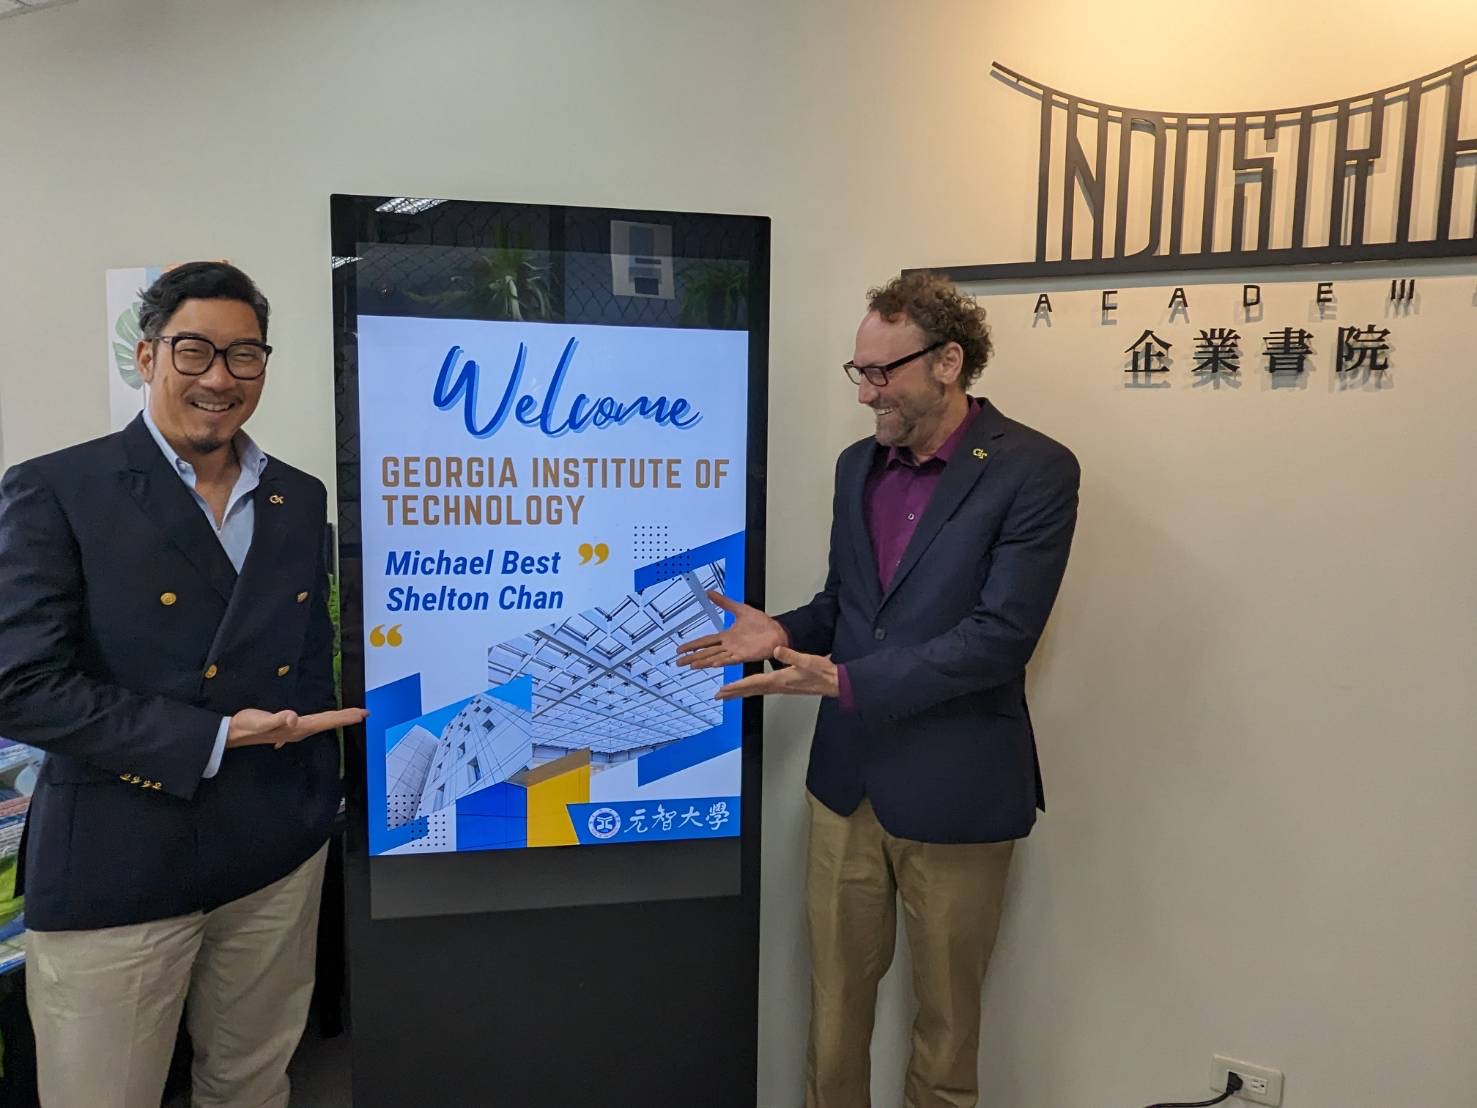 Shelton Chan, managing director of the Shenzhen Georgia Tech Education Foundation, with Michael Best